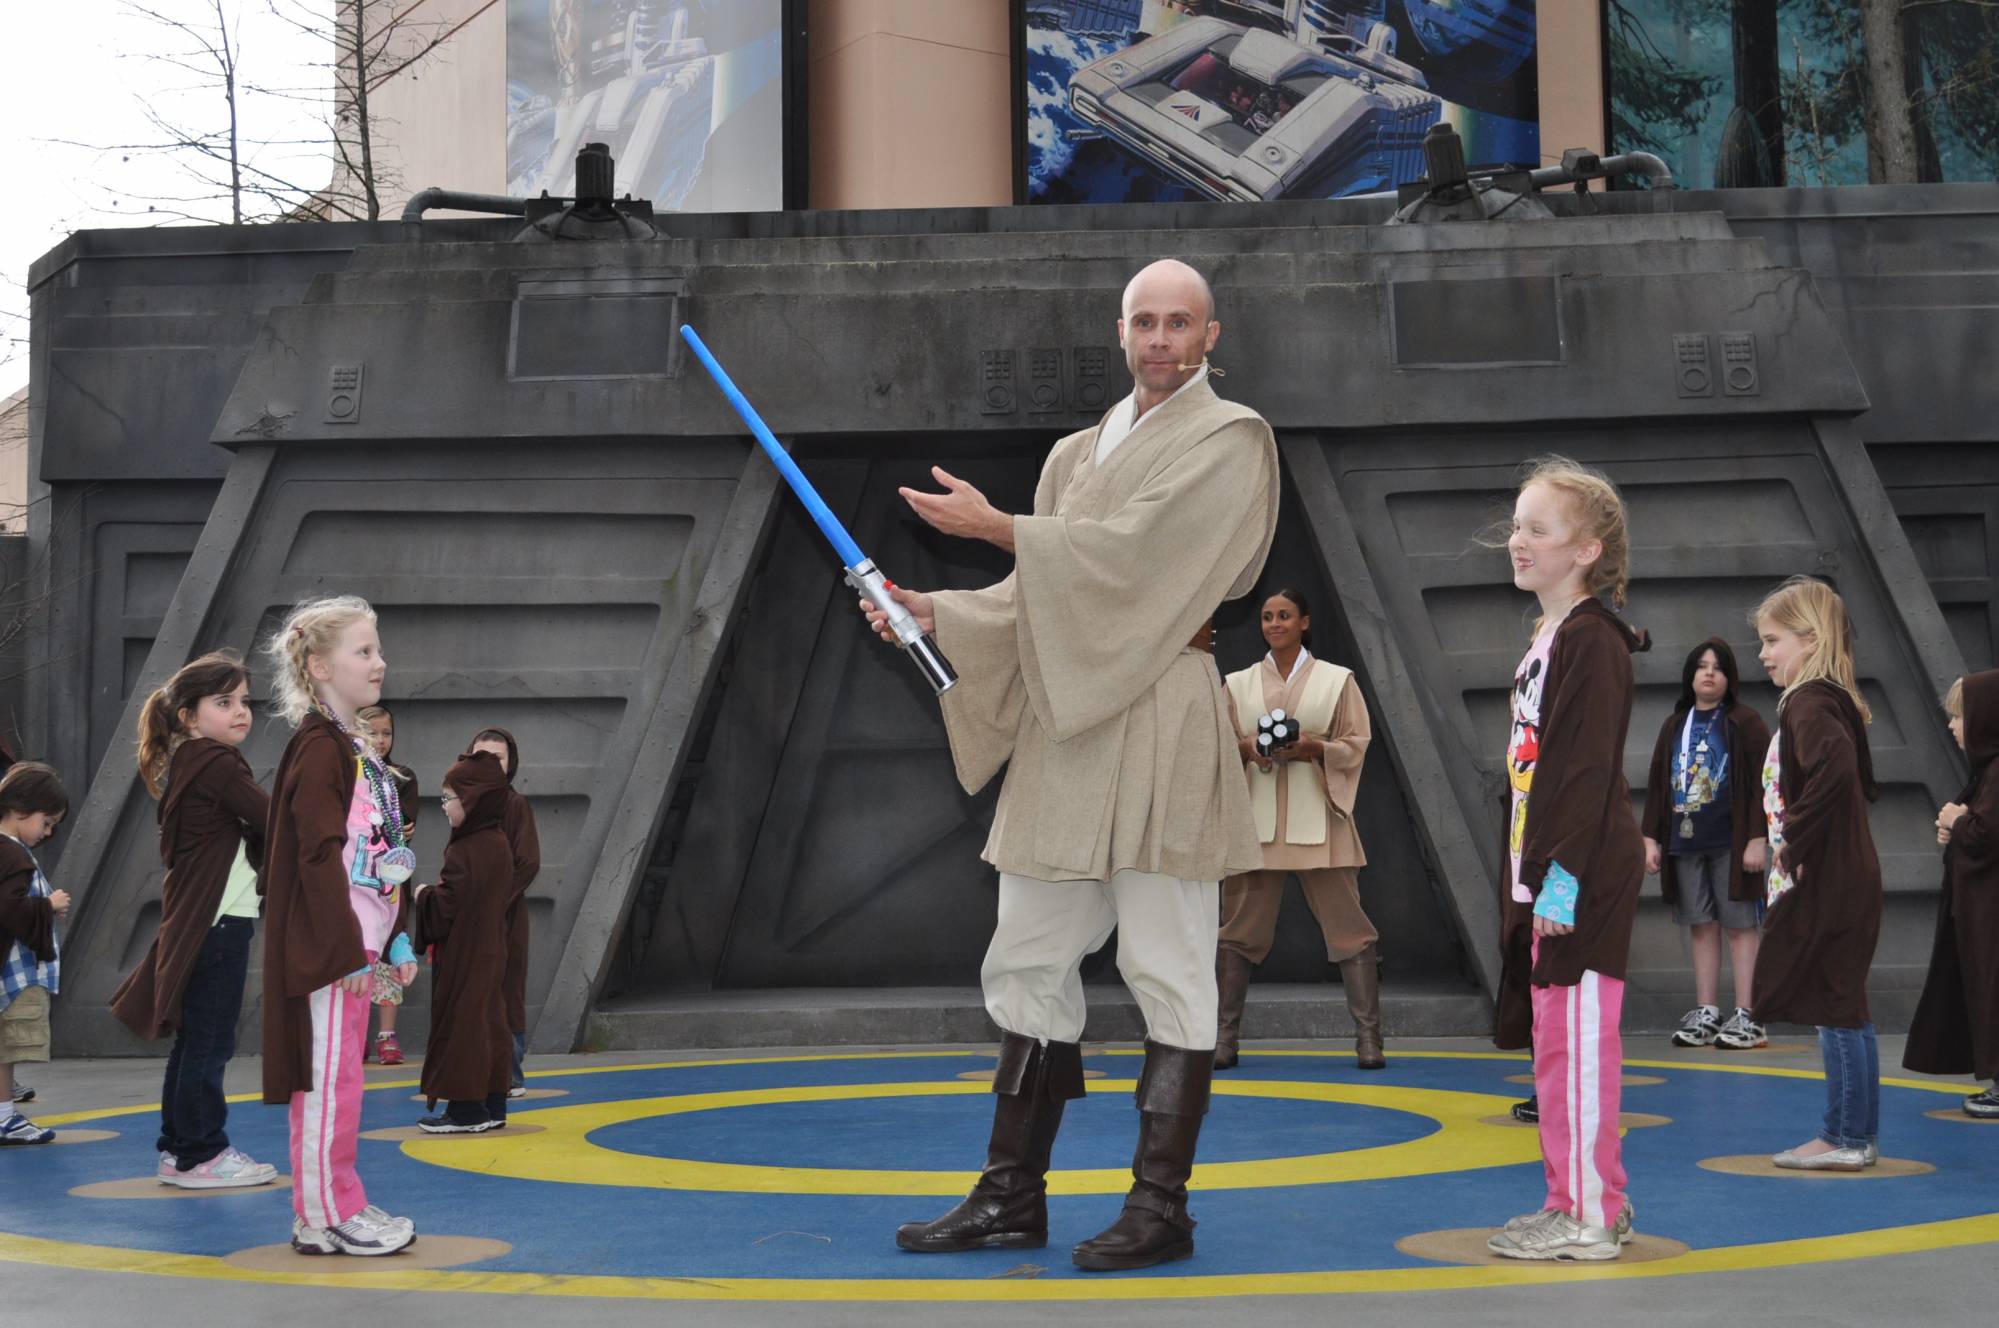 Children learn the way of the Jedi at Disney Hollywood Studios |PassPorter.com